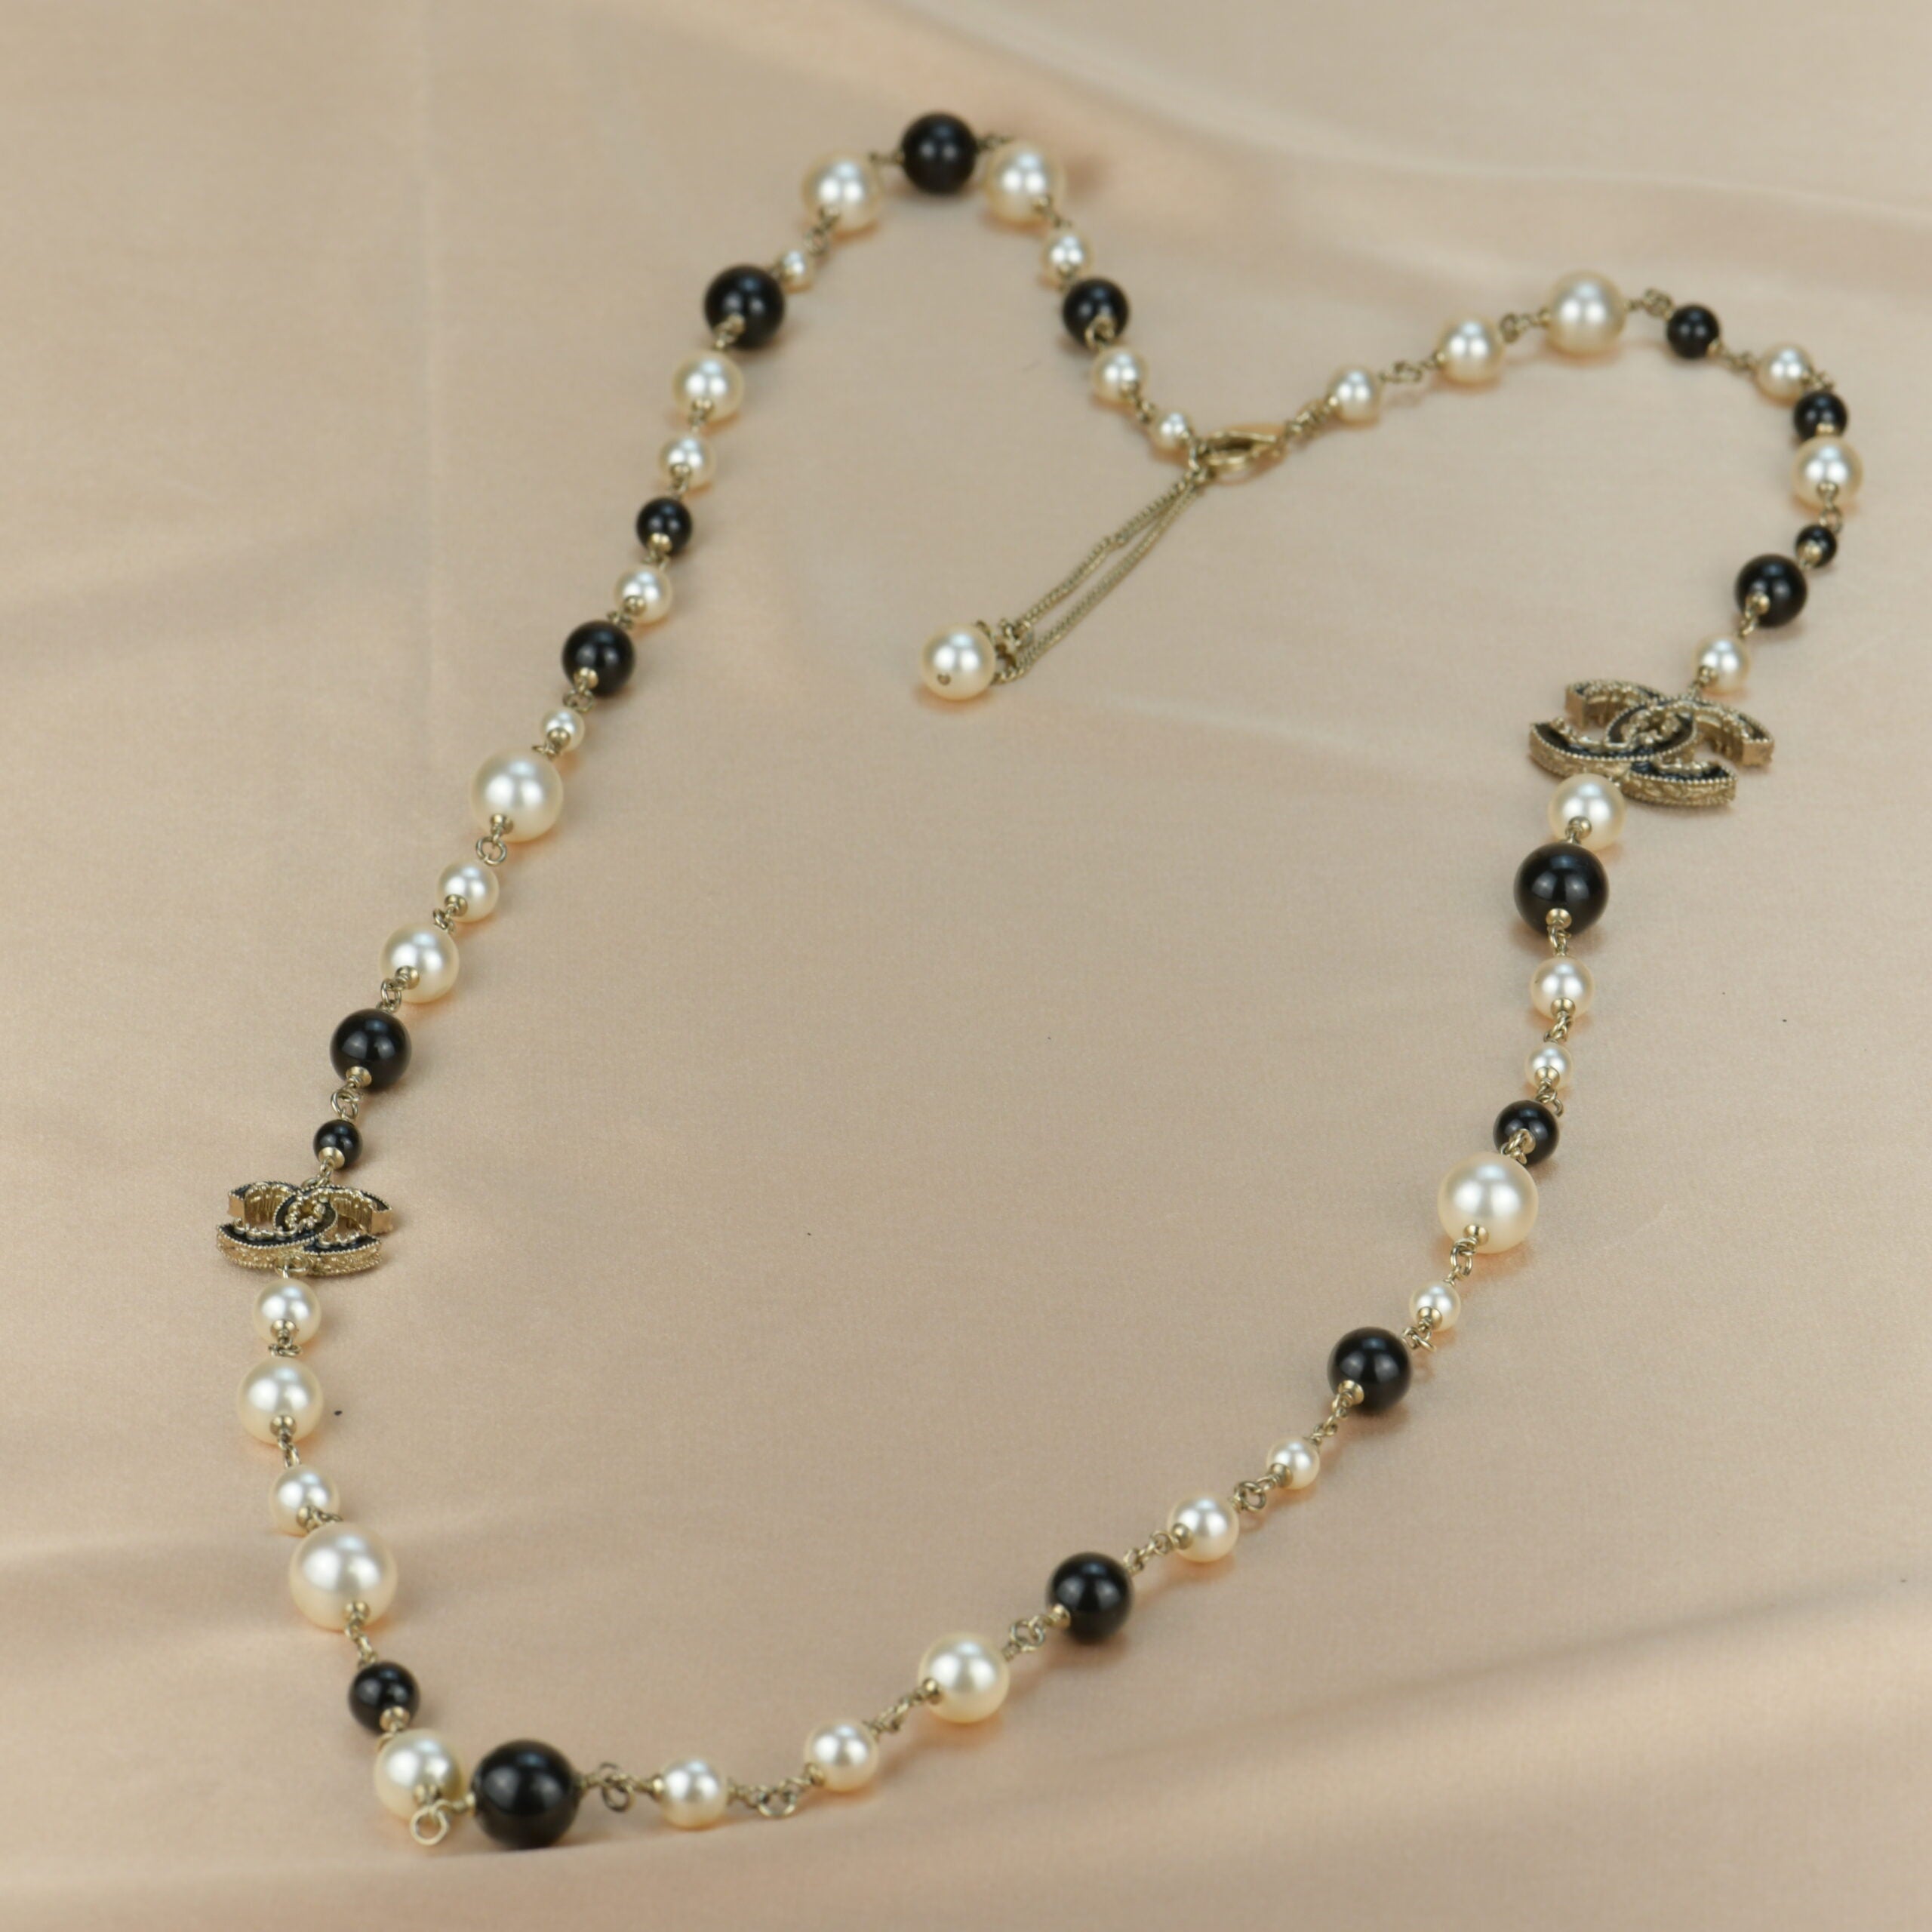 CHANEL 1981 Vintage Gripoix CLEAR Crystals Faux PEARL 54